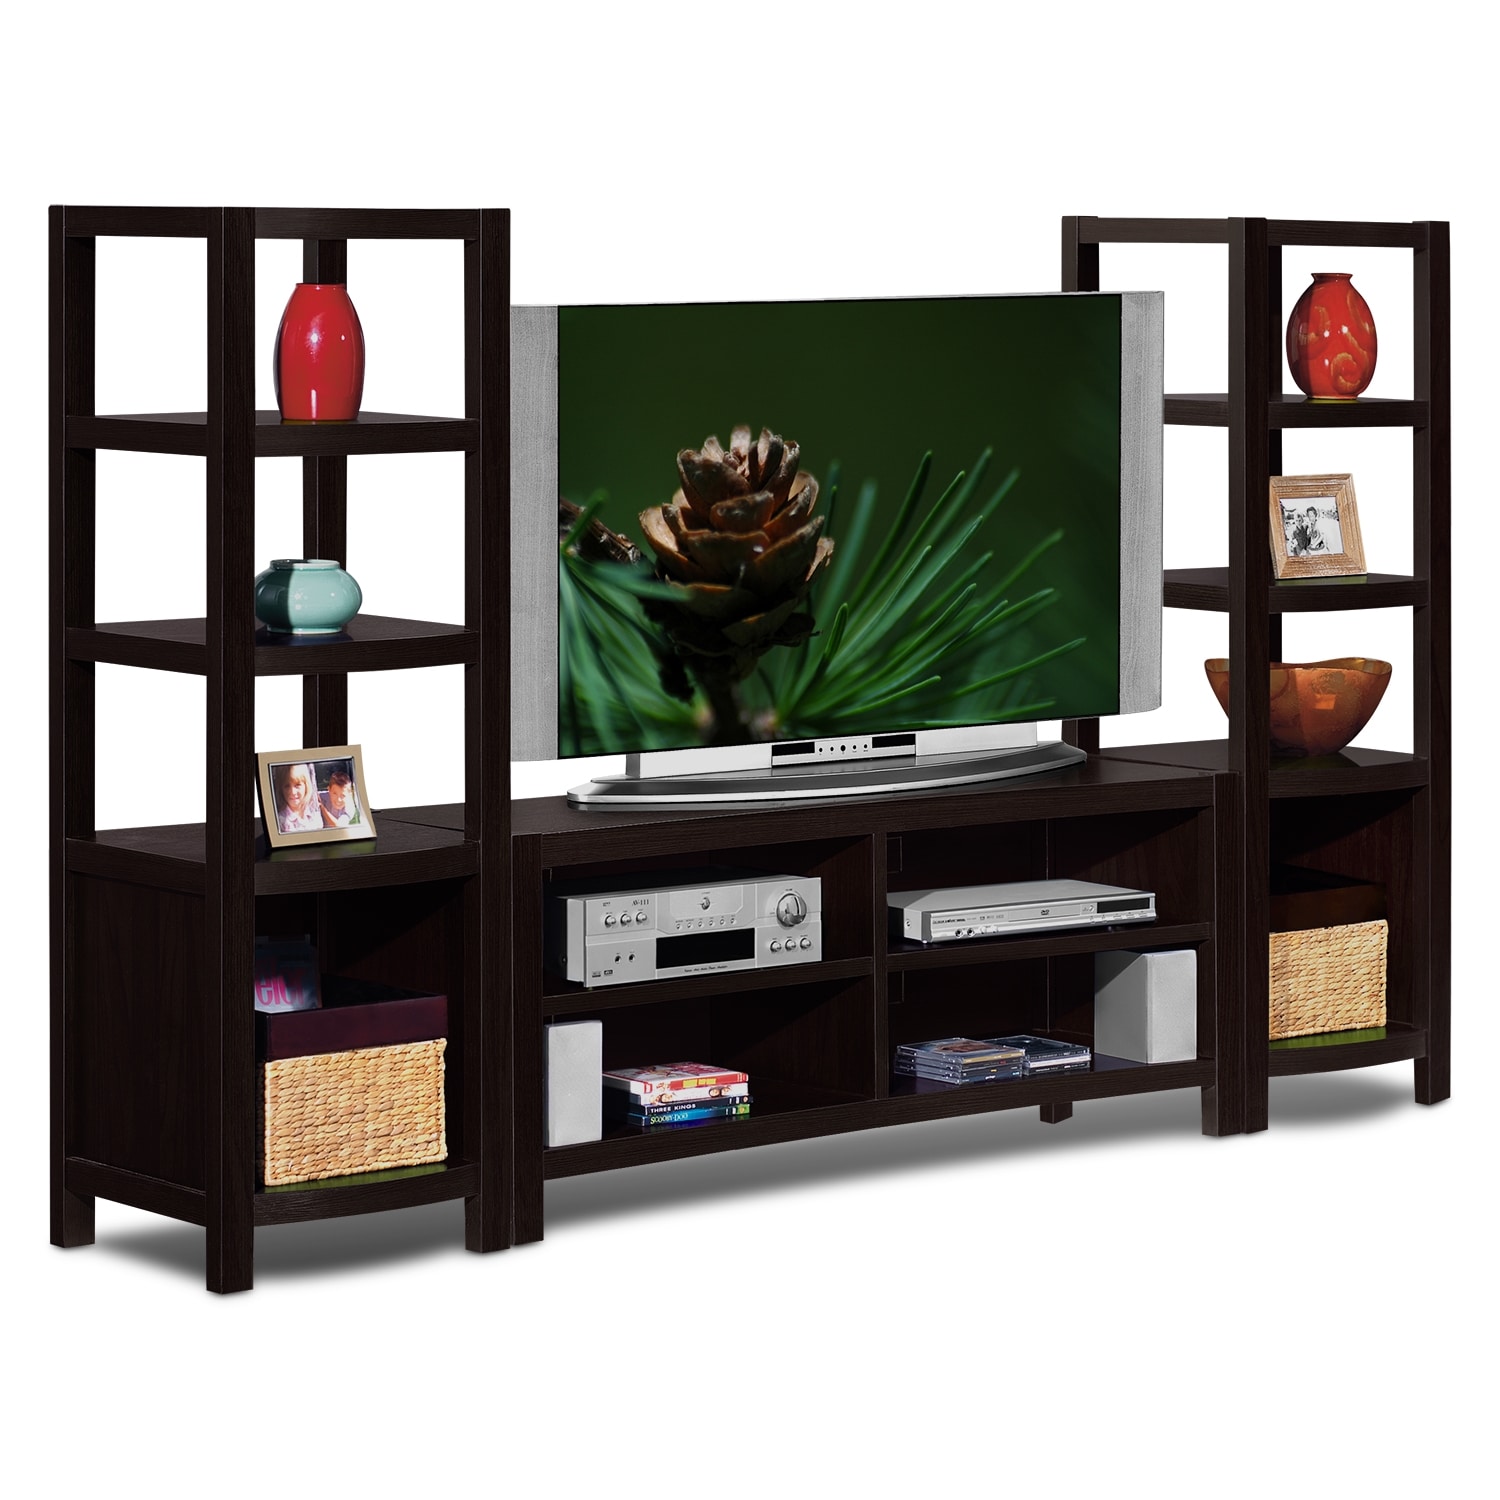 Townsend 3 Pc. Entertainment Wall Unit | Value City Furniture